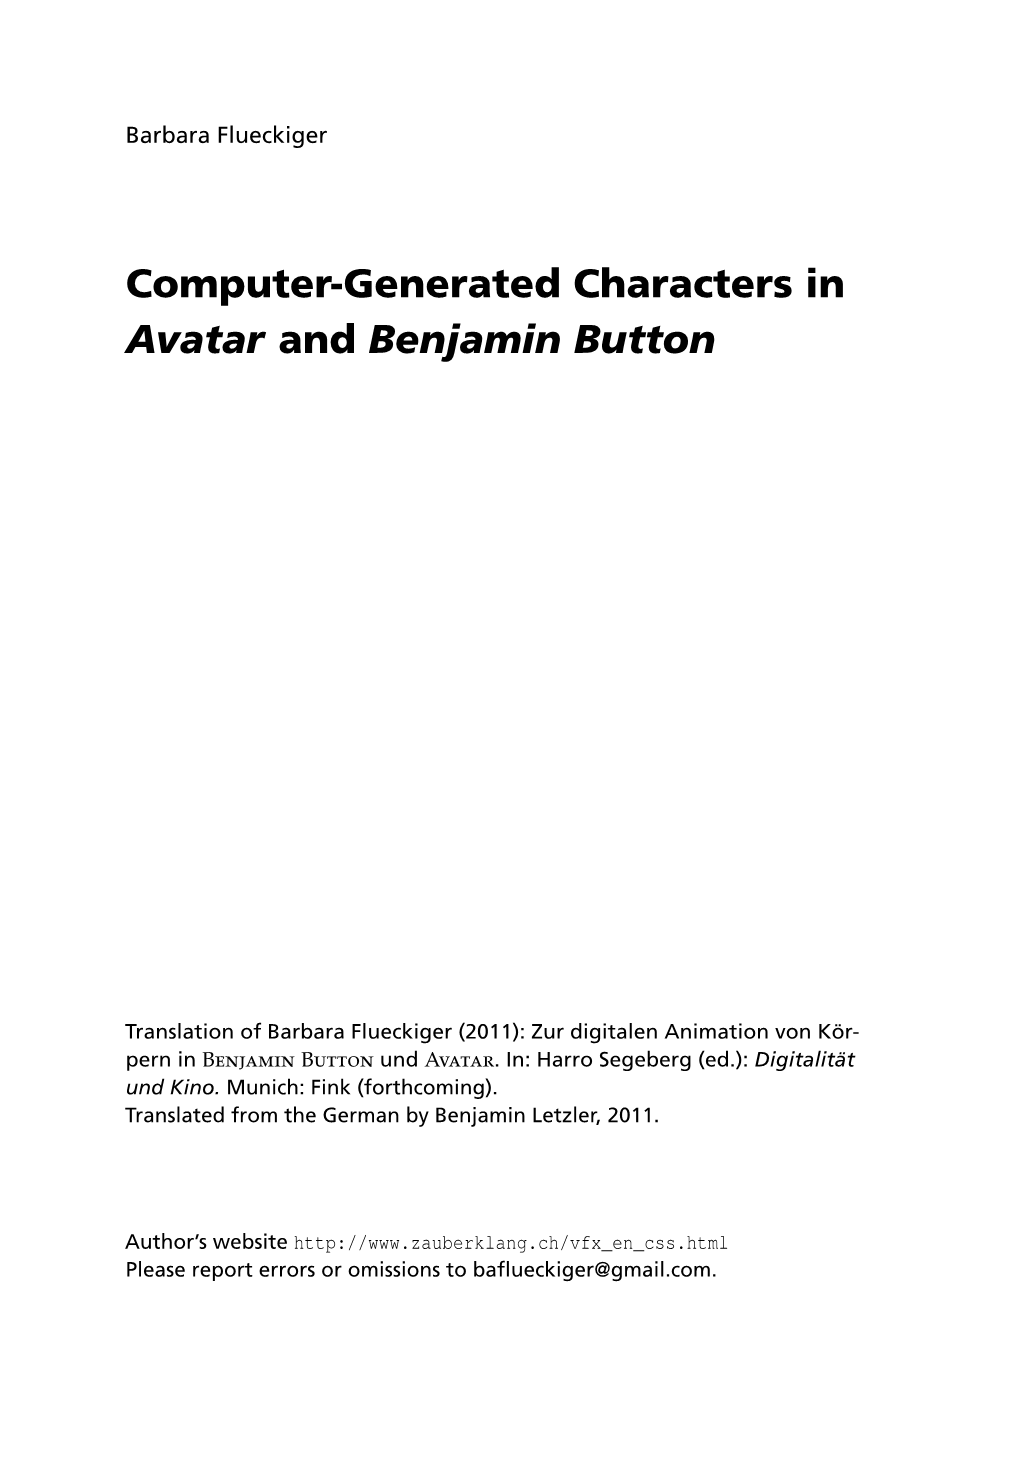 Computer-Generated Characters in Avatar and Benjamin Button